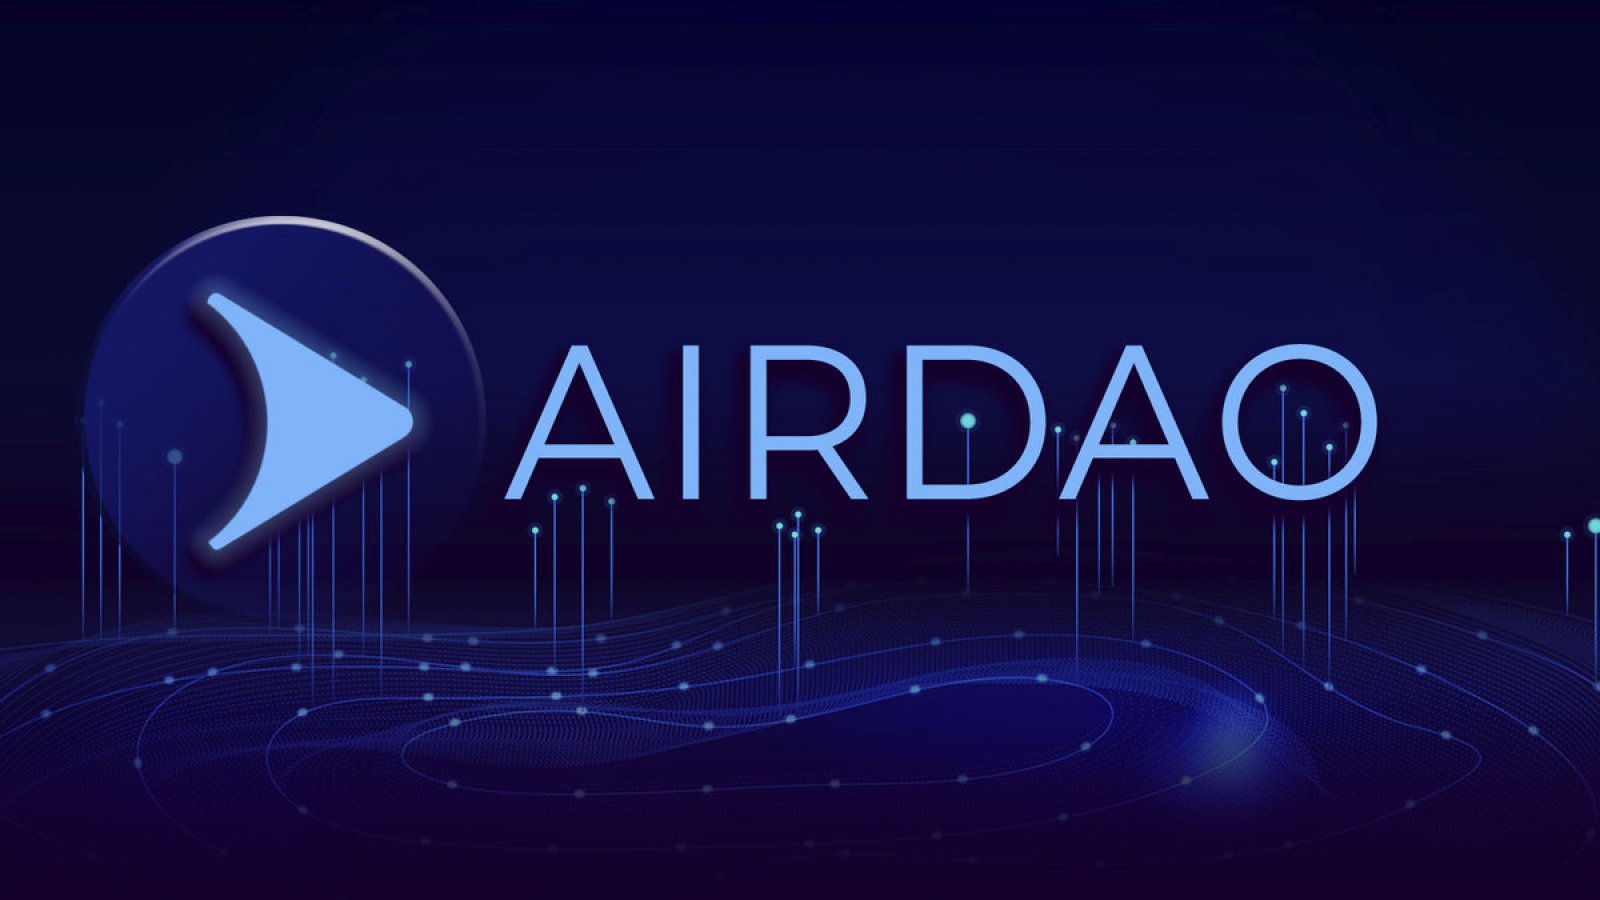 AirDAO Network Commemorates Four Years with Historic Airdrop